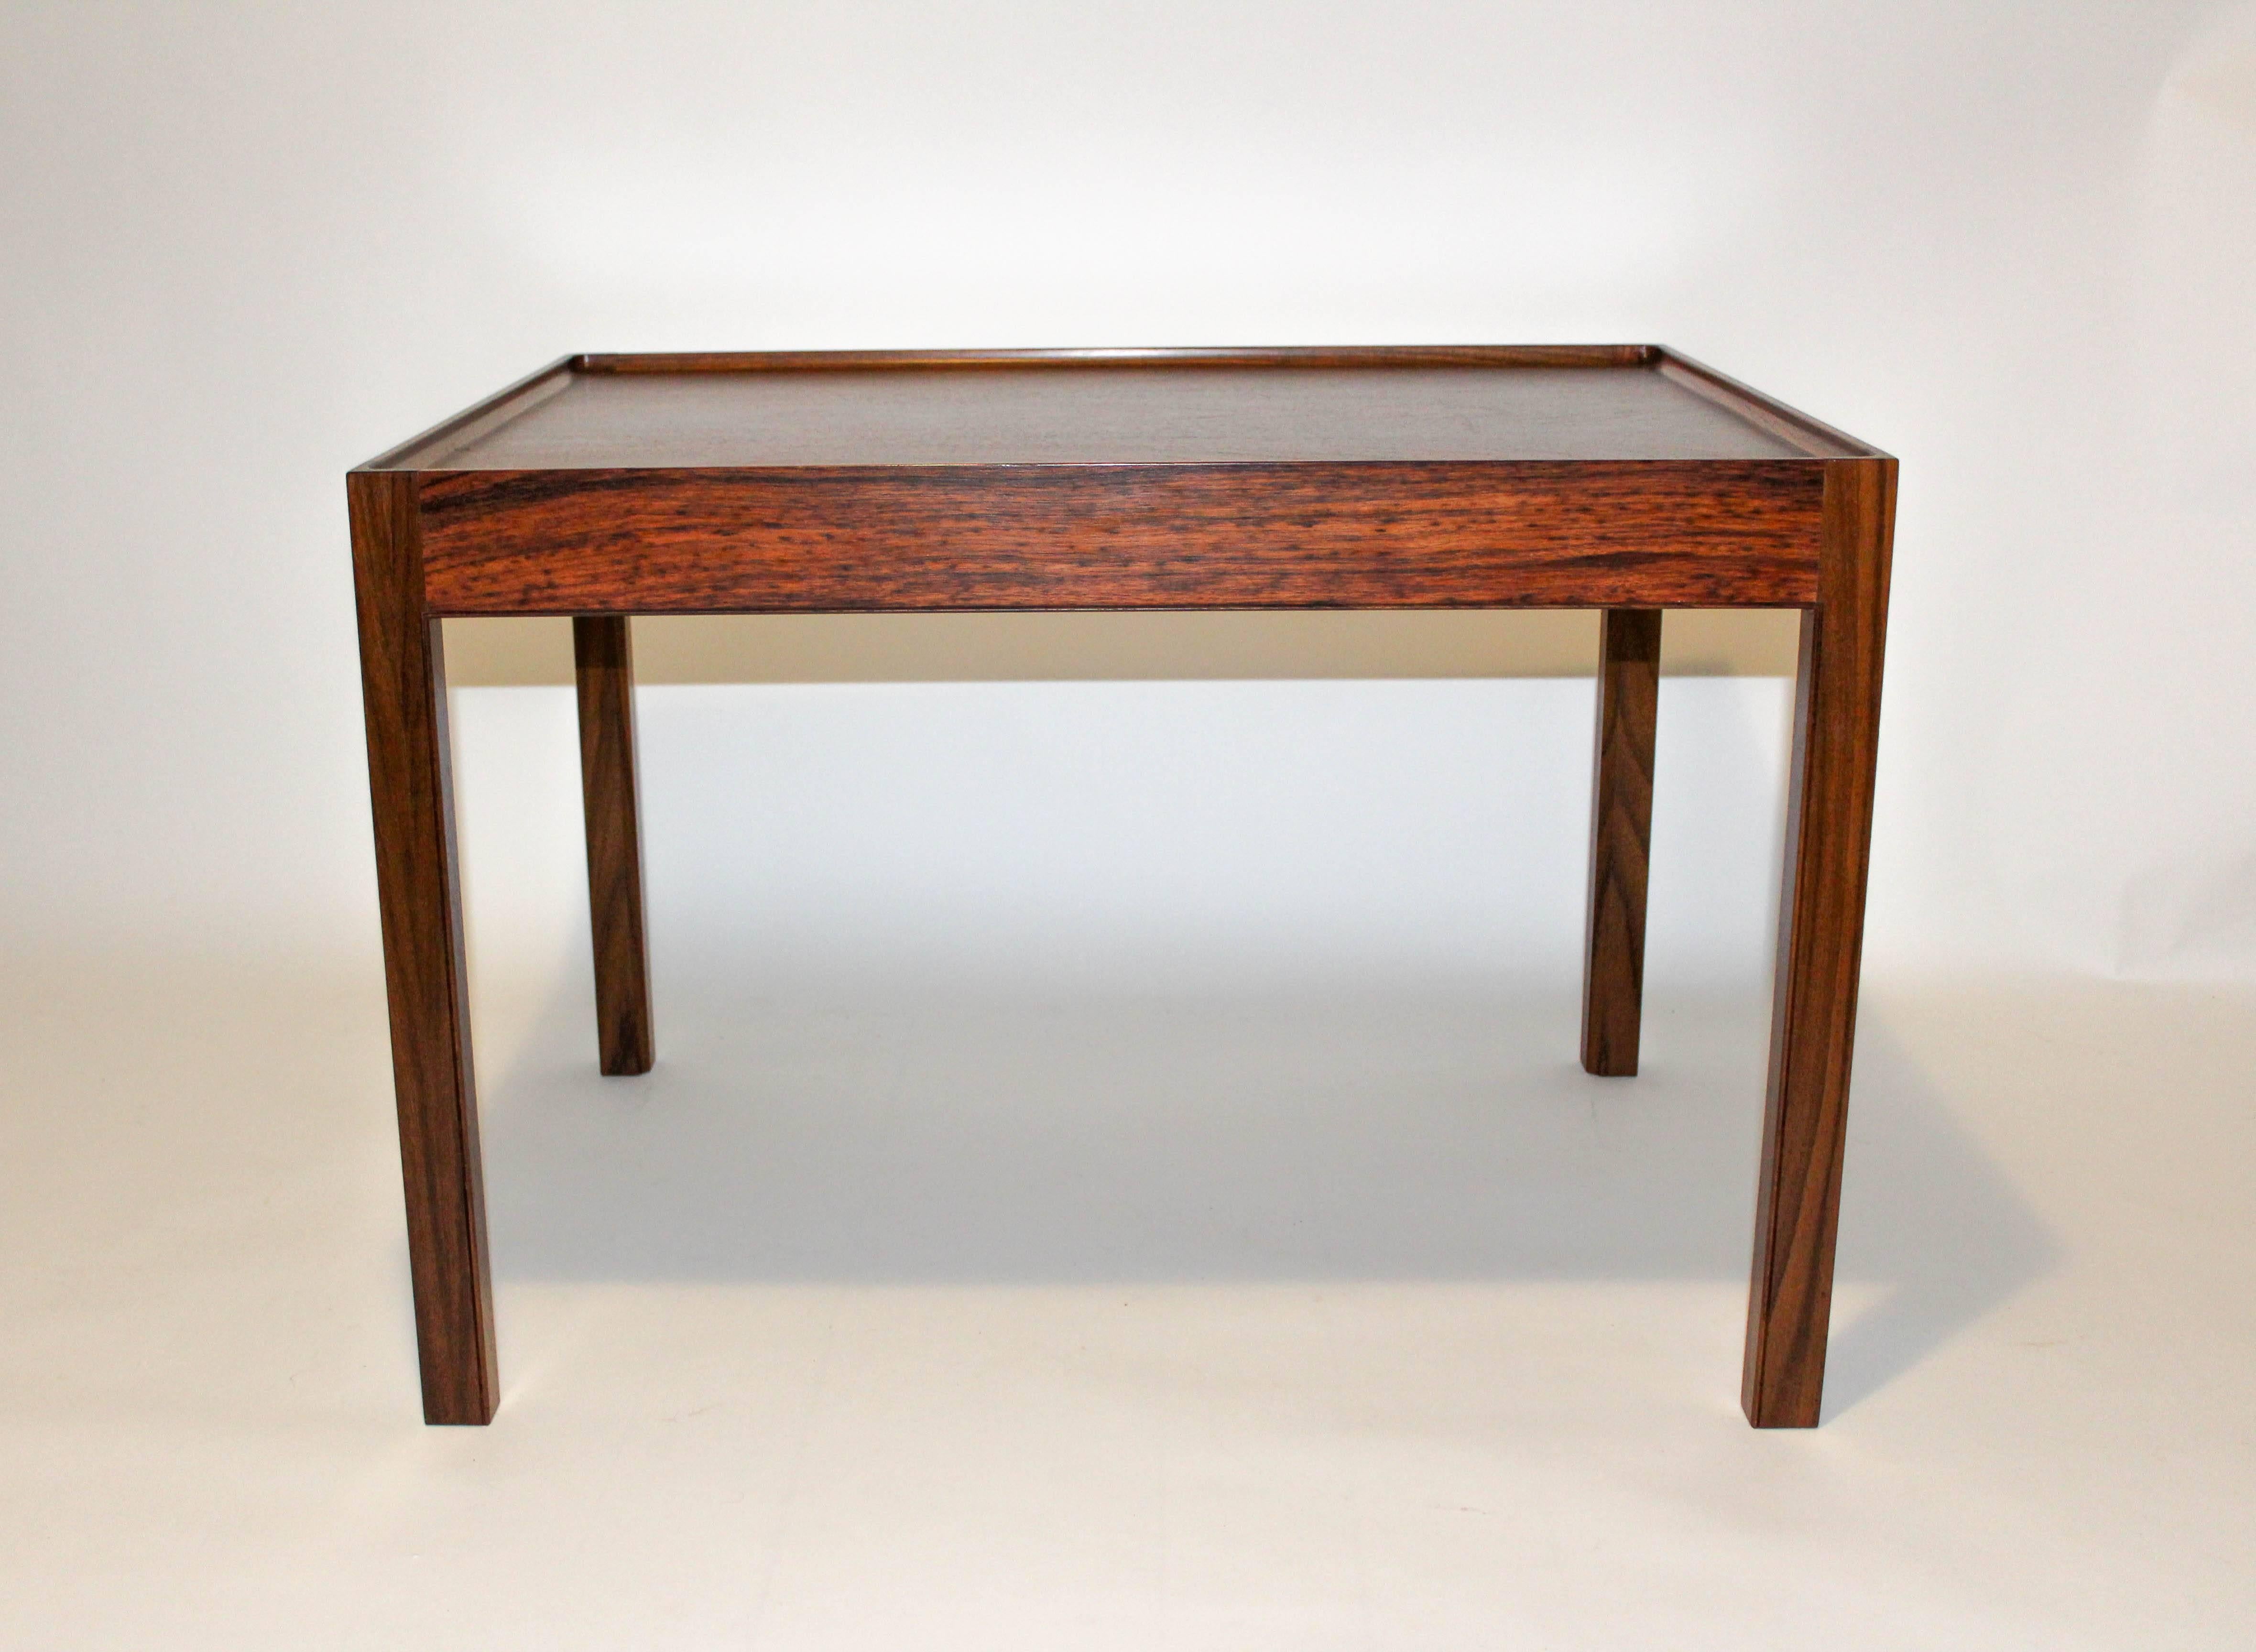 Midcentury Danish rosewood coffee table with elevated edges by Eric Christian Sørensen. The table is in very good vintage condition. Labeled BOEX.